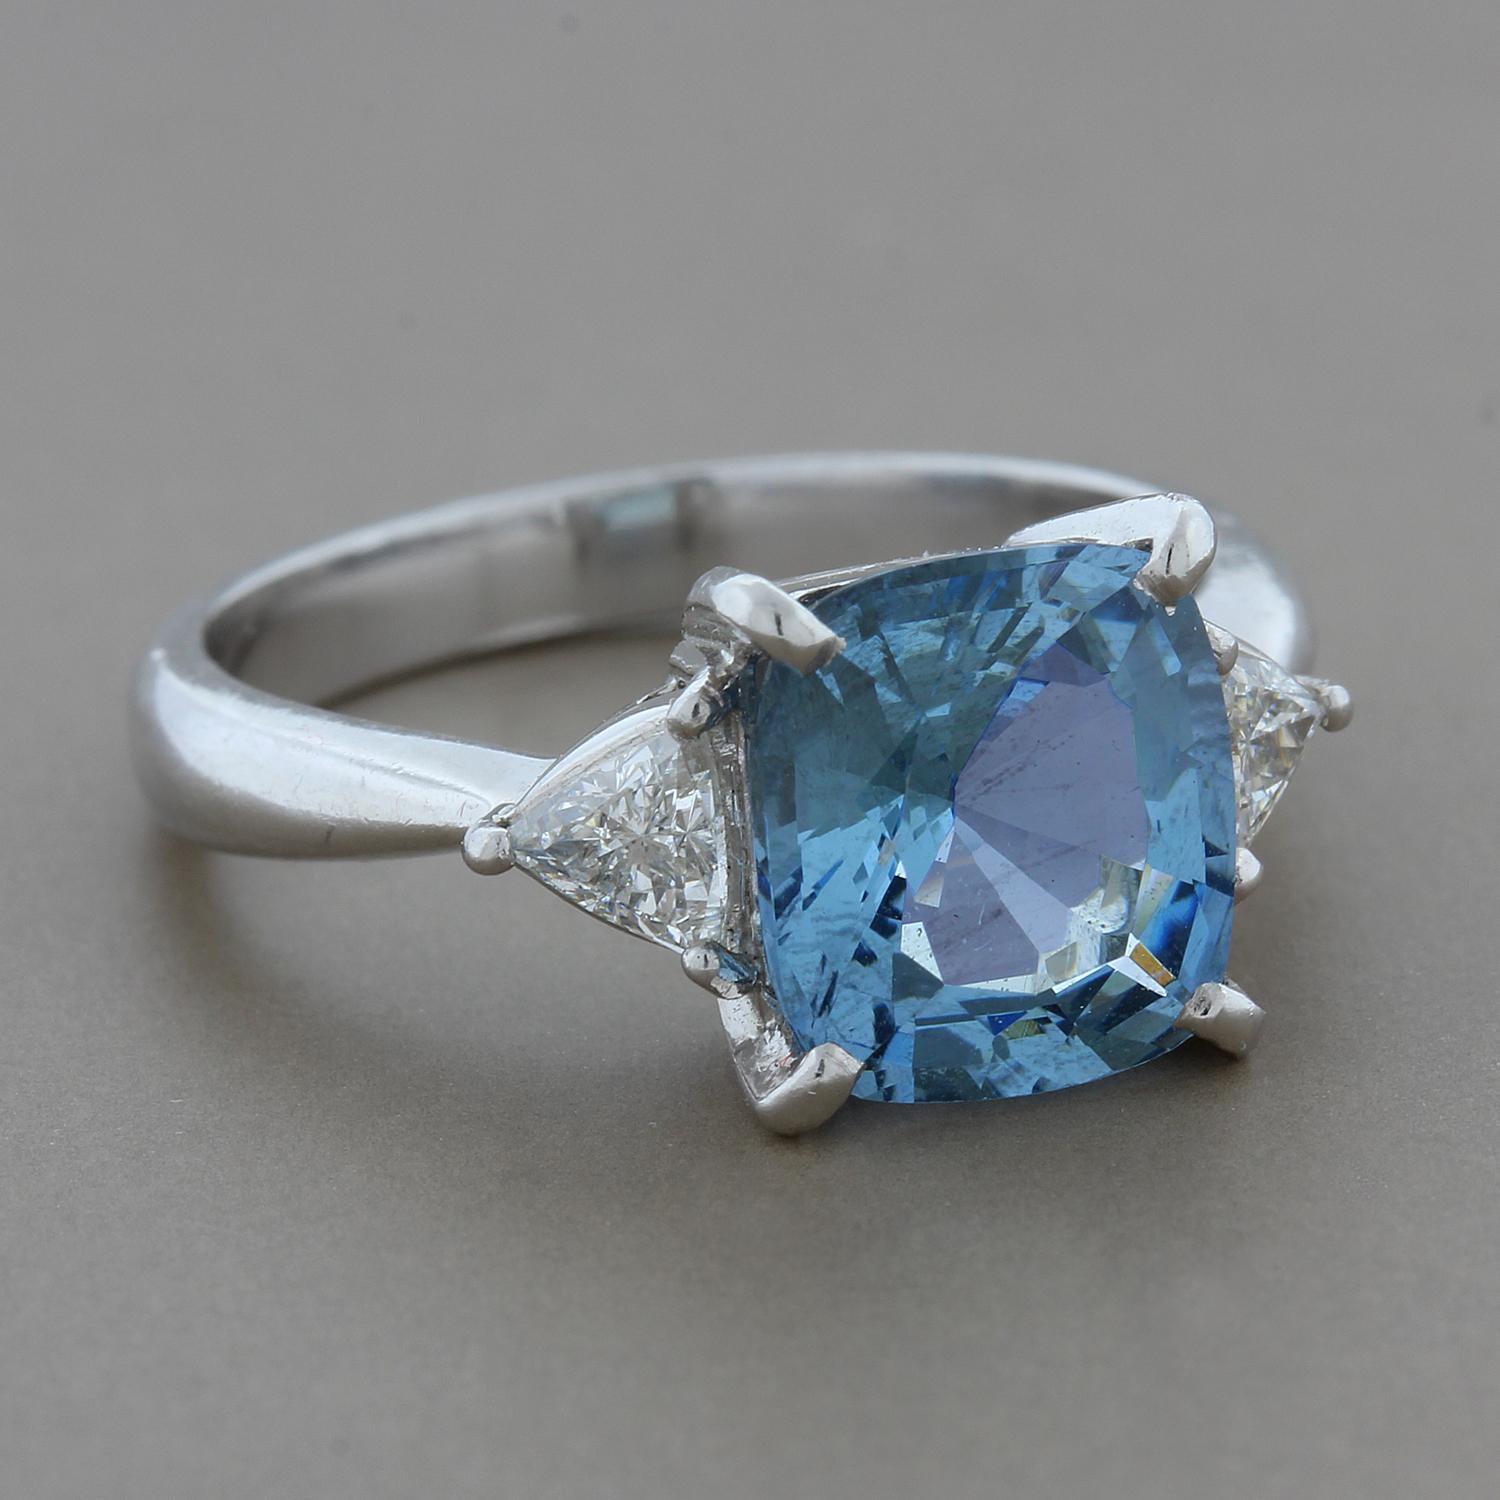 A stunning 2.34 carat cushion cut aquamarine in an ocean blue color centers this beautiful ring.  Two trillion cut diamonds, totaling 0.32 carats, are set on the sides for added sparkle!  All set in platinum.

Currently ring size 6.25